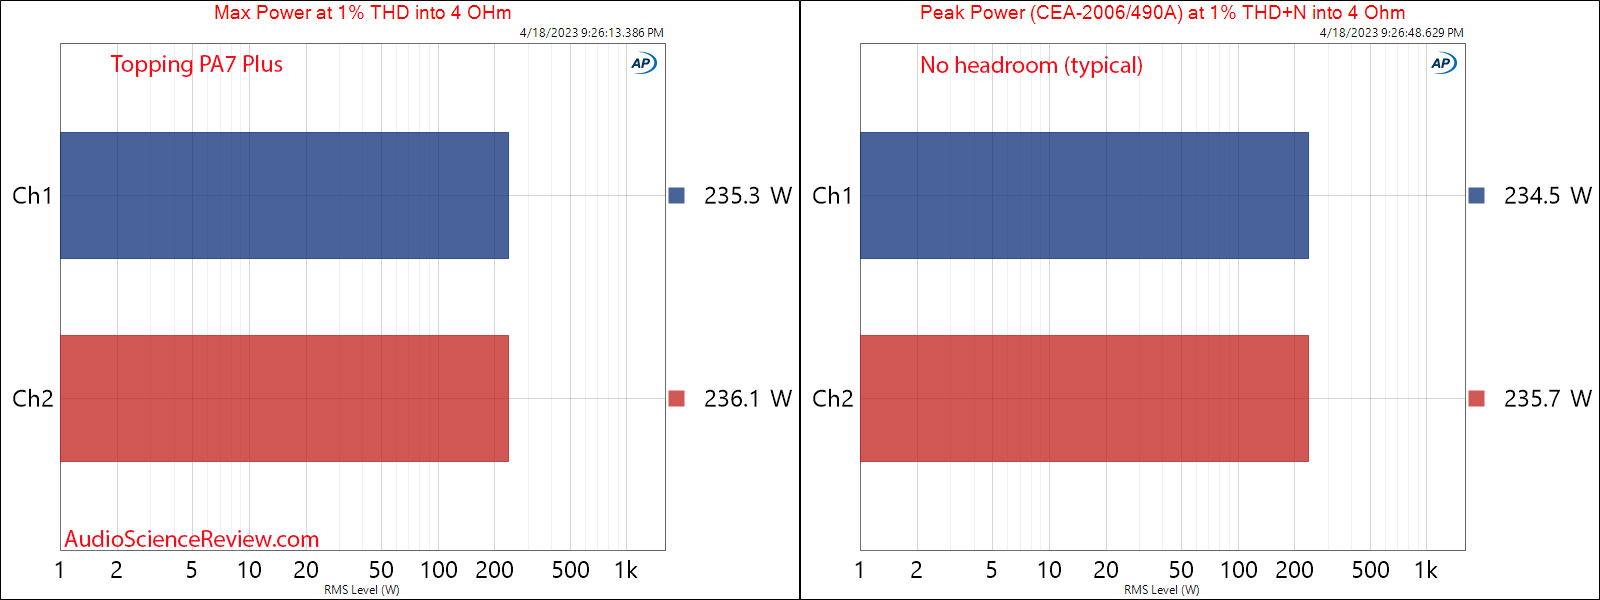 Topping PA7 Plus Amplifier Balanced Max and Peak Power into 4 ohm vs frequency Measurement.png